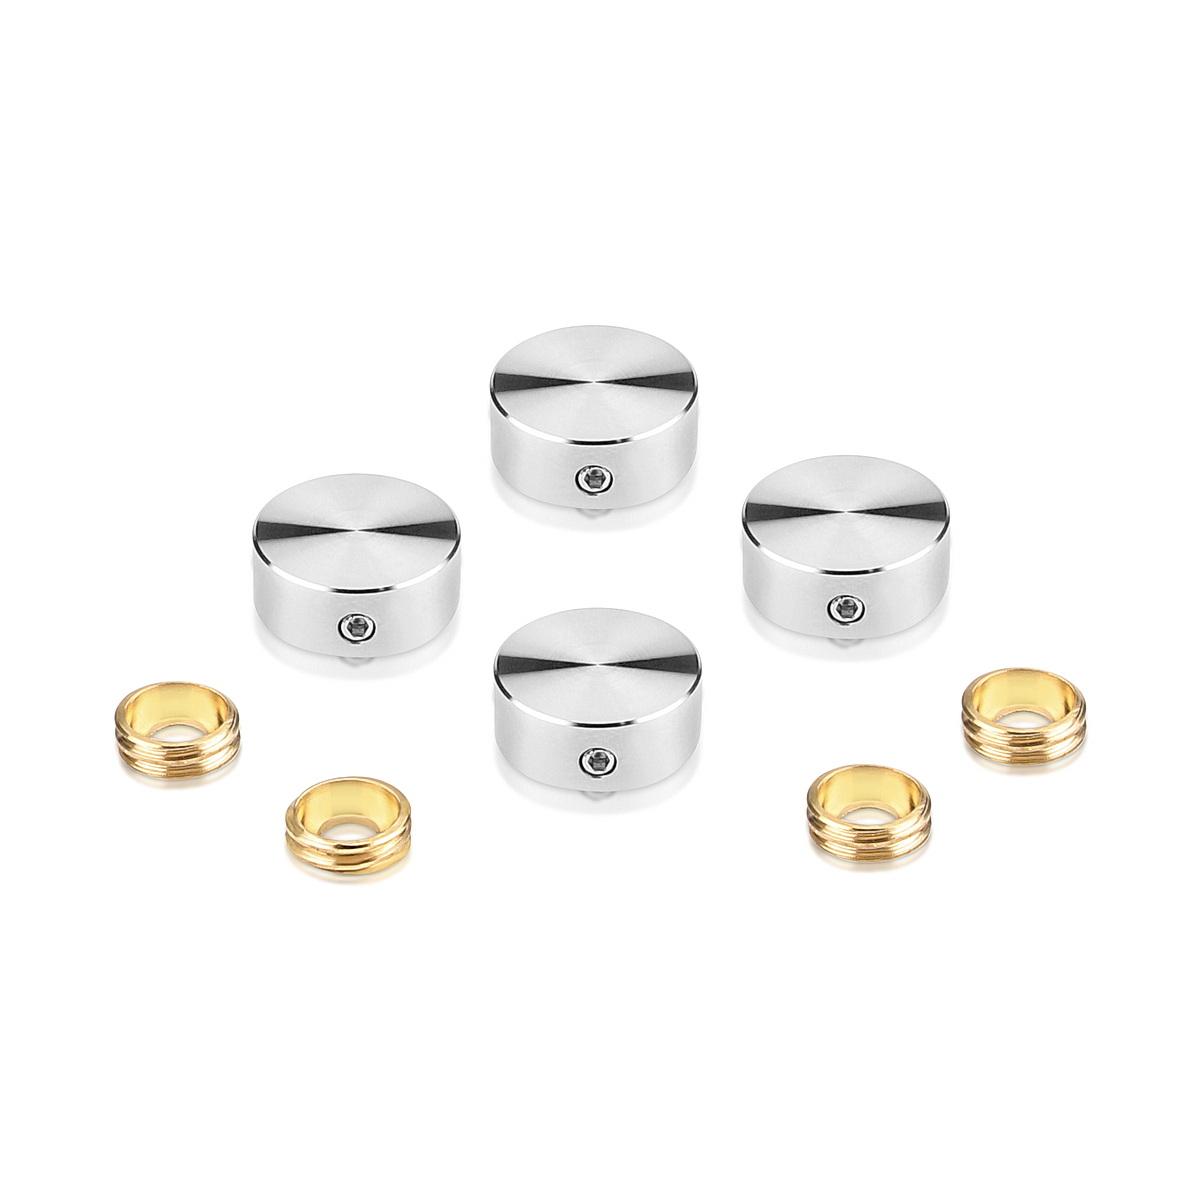 Set of 4 Locking Screw Cover Diameter 5/8'', Satin Brushed Stainless Steel Finish (Indoor Use Only)